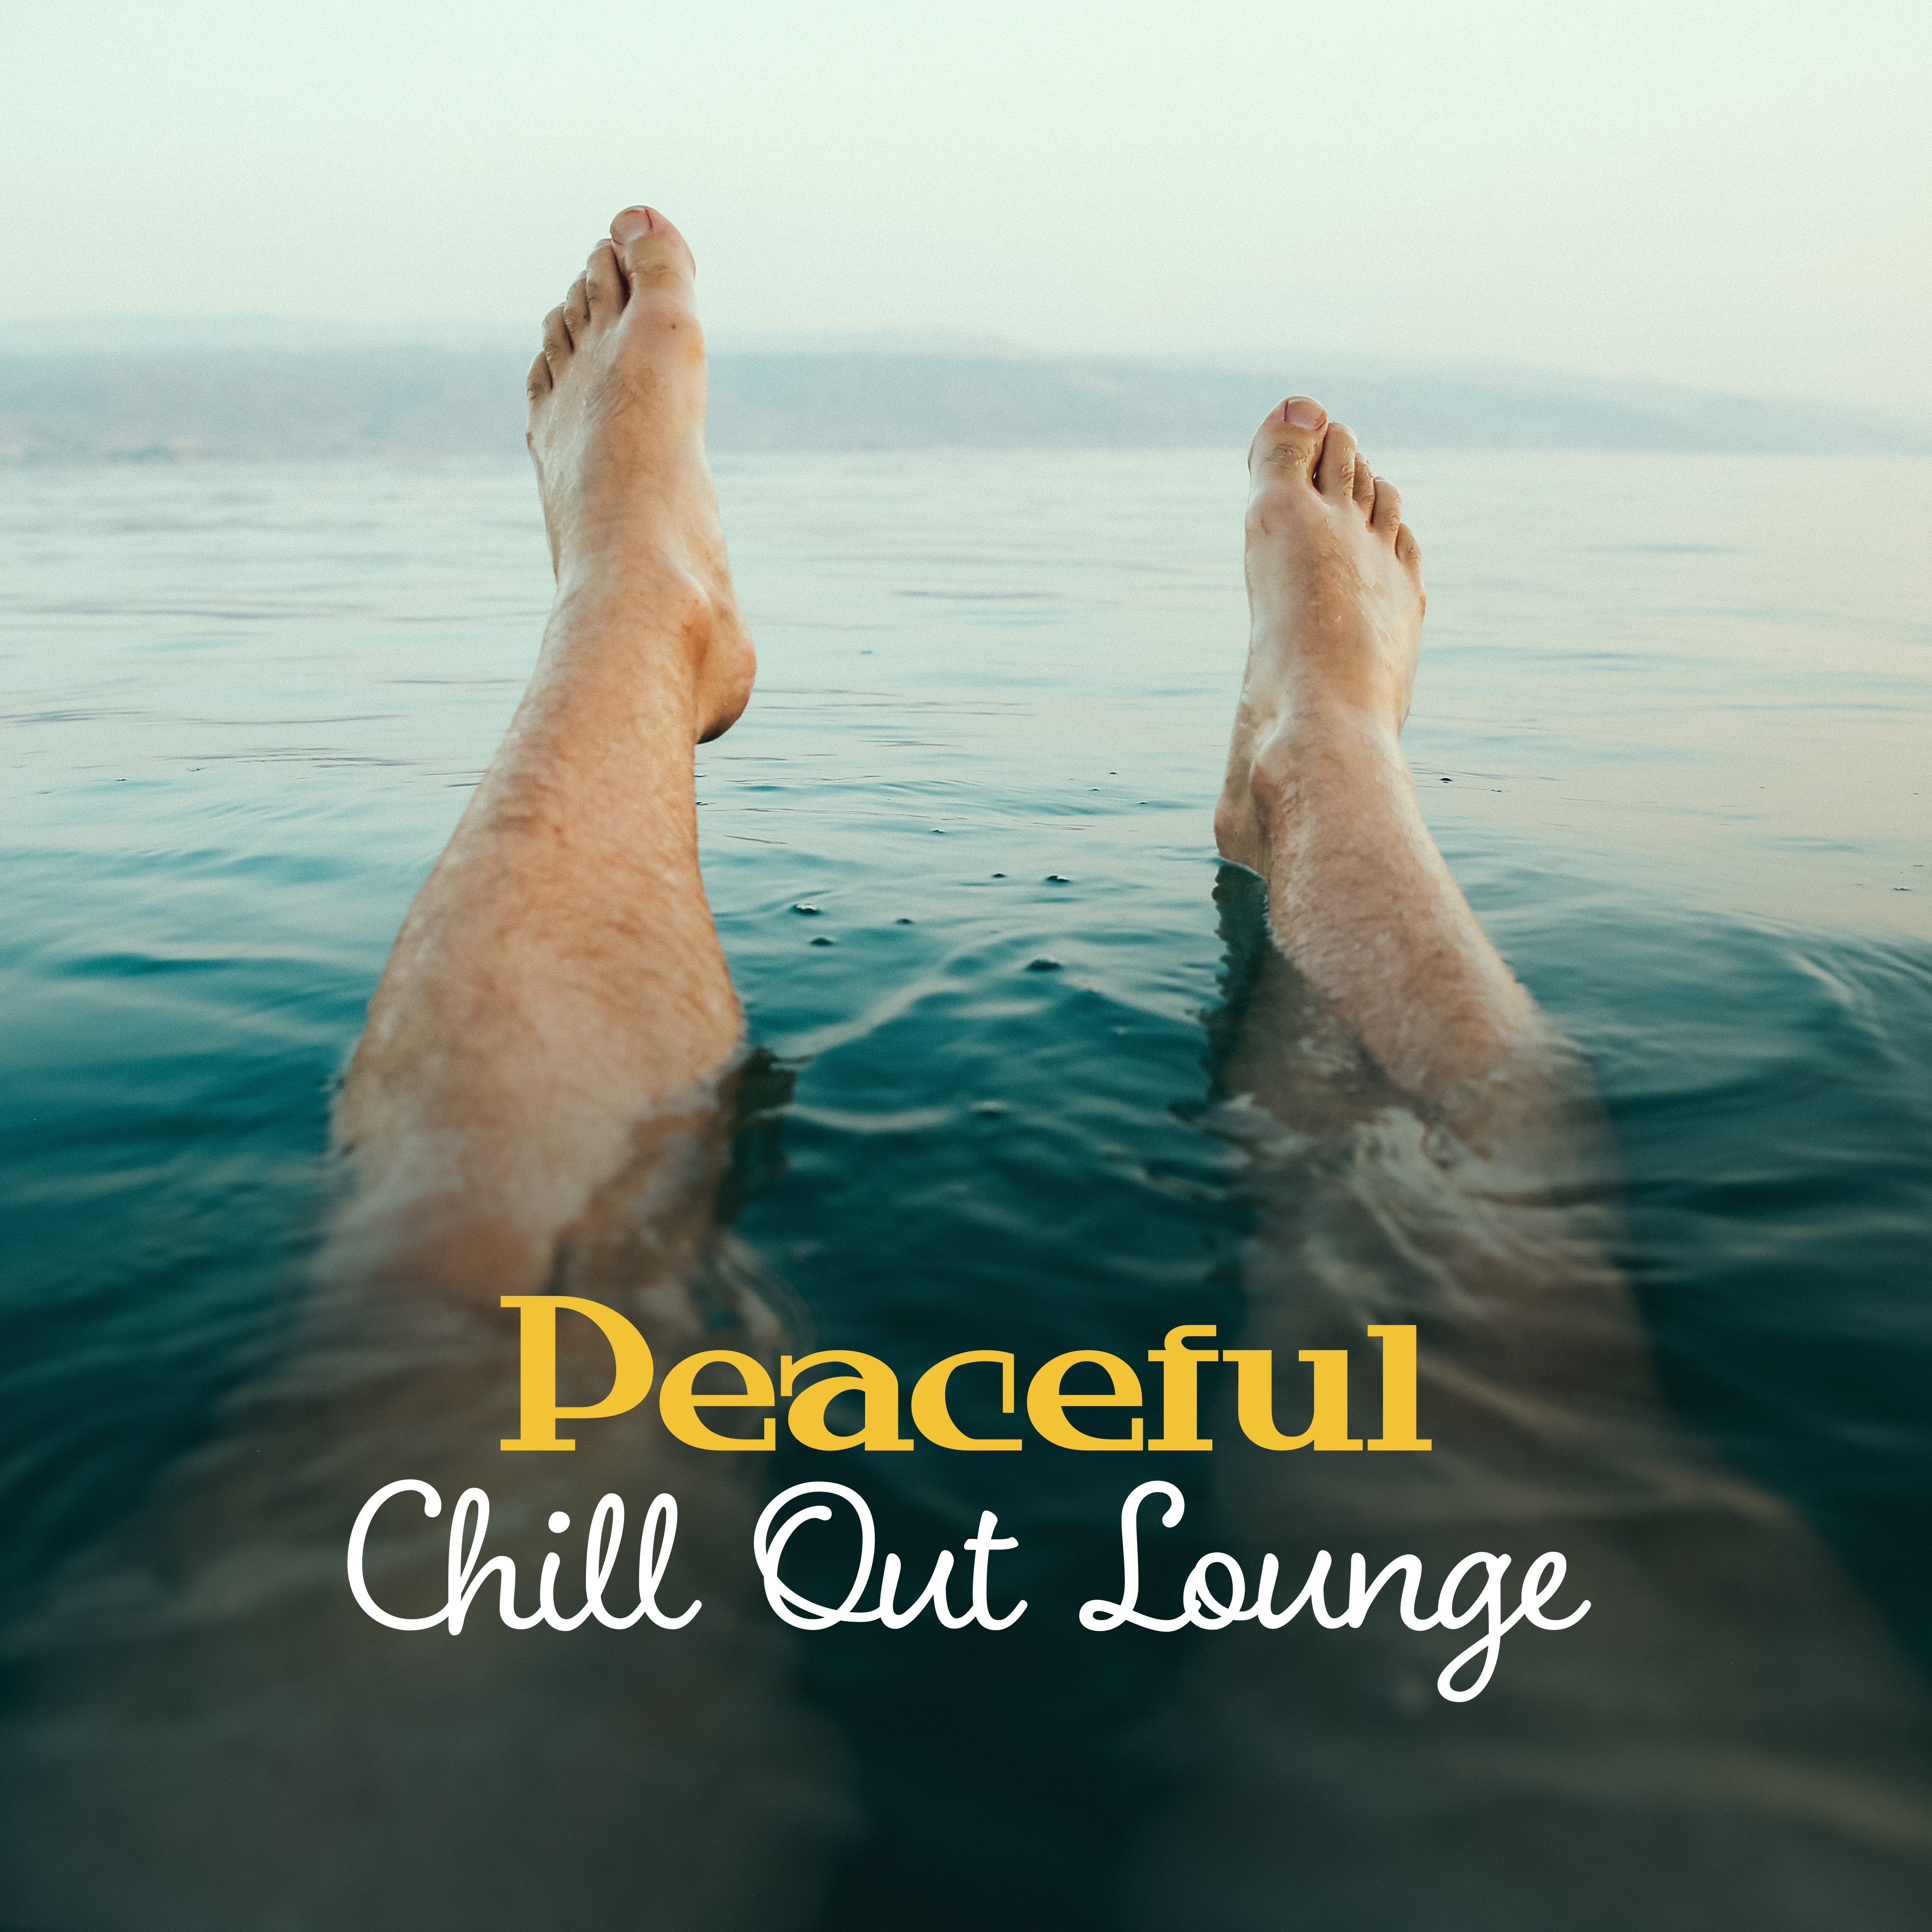 Peaceful Chill Out Lounge  Easy Listening, Stress Relief, Beach Relaxation, Calming Vibes